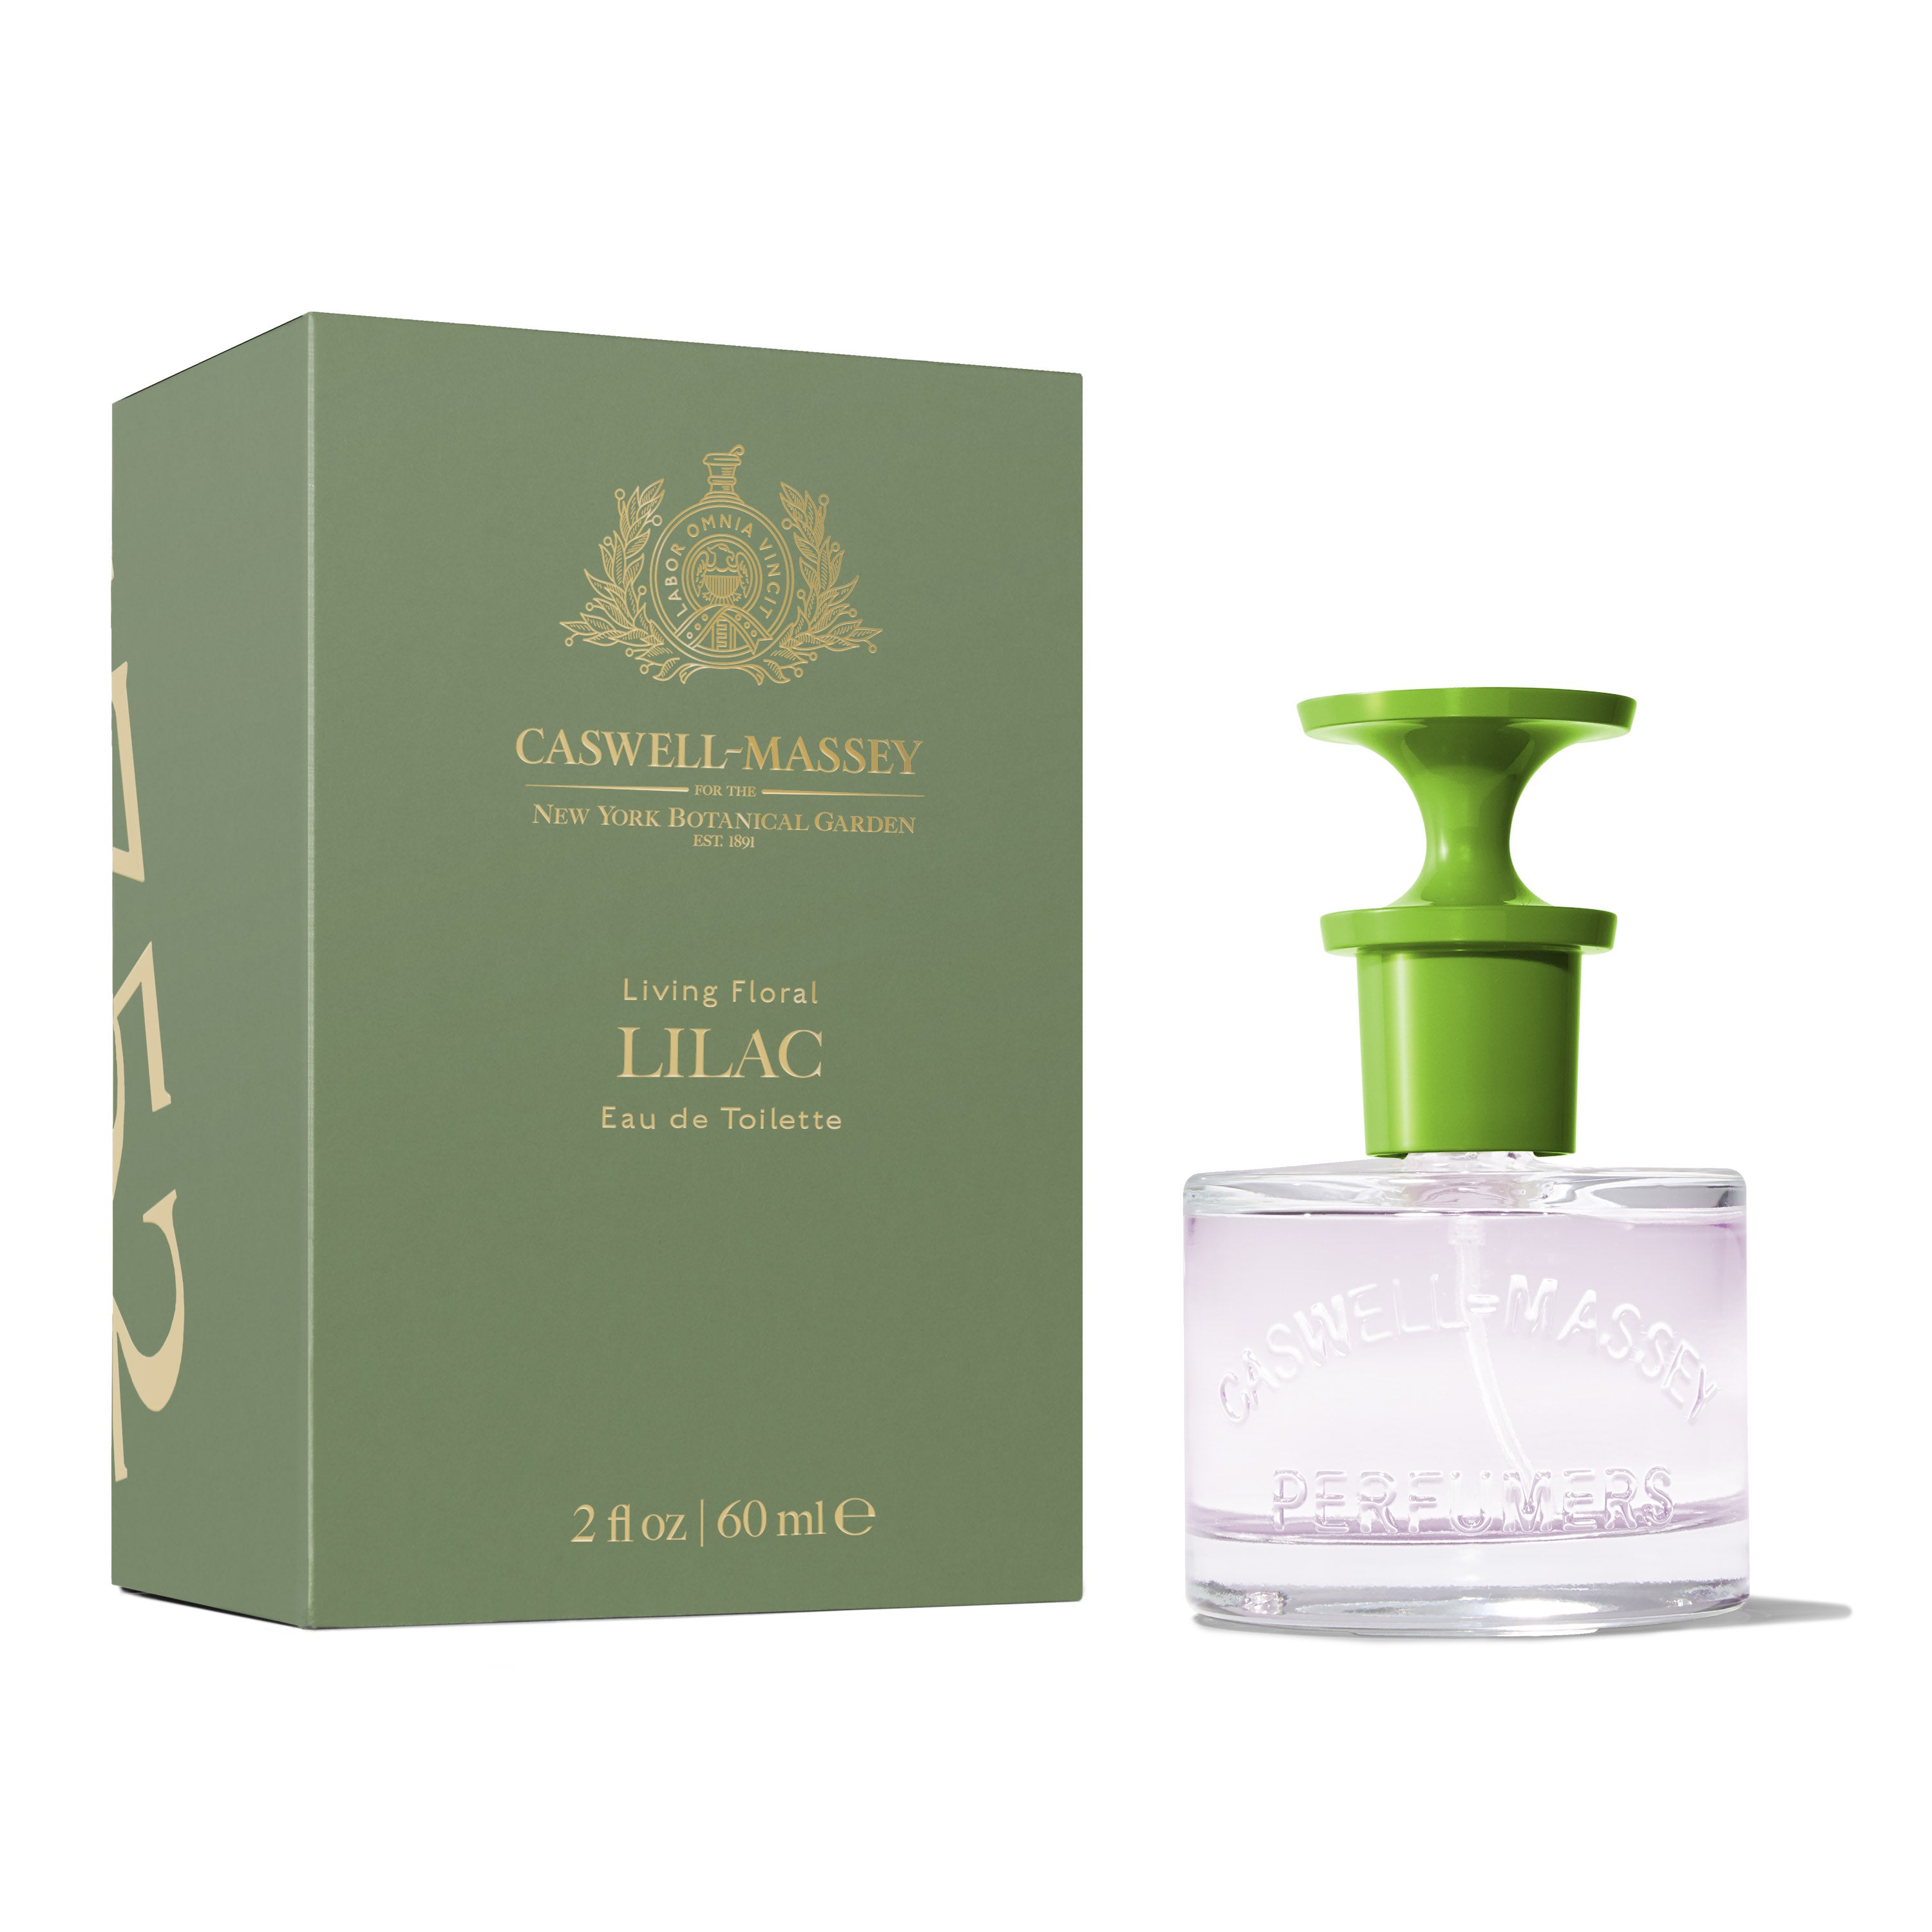 Lilac Eau de Toilette, Fine Fragrance by Caswell-Massey, 60mL Full Size, shown with pale green box